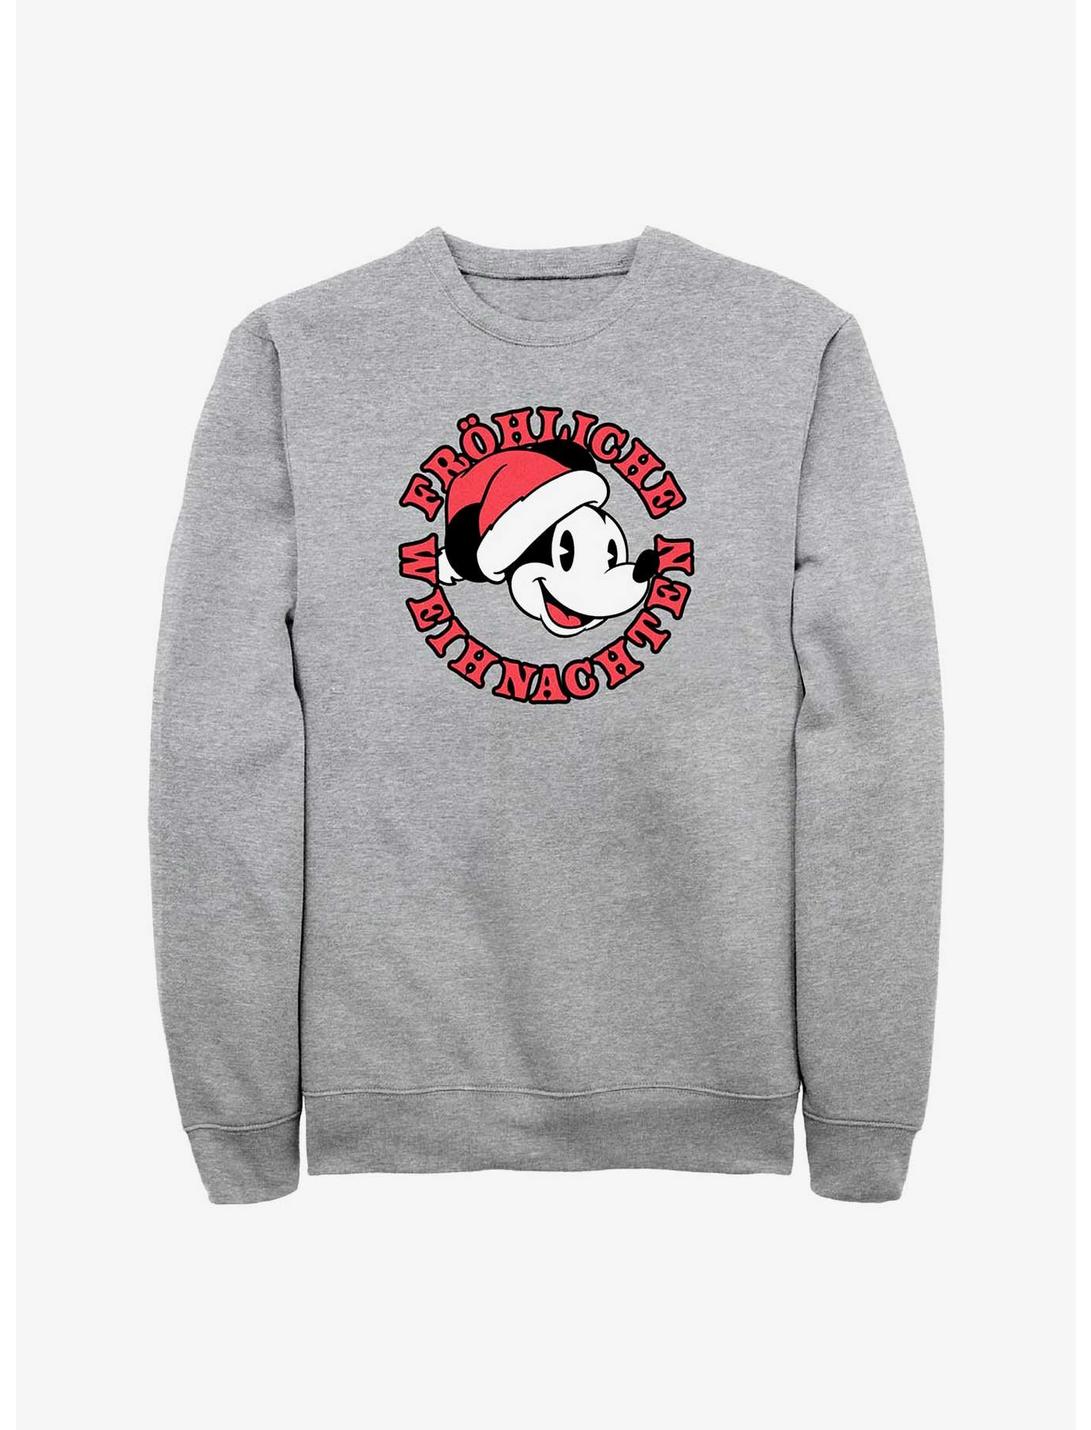 Plus Size Disney Mickey Mouse Frohliche Weihnachten Merry Christmas in German Sweatshirt, ATH HTR, hi-res